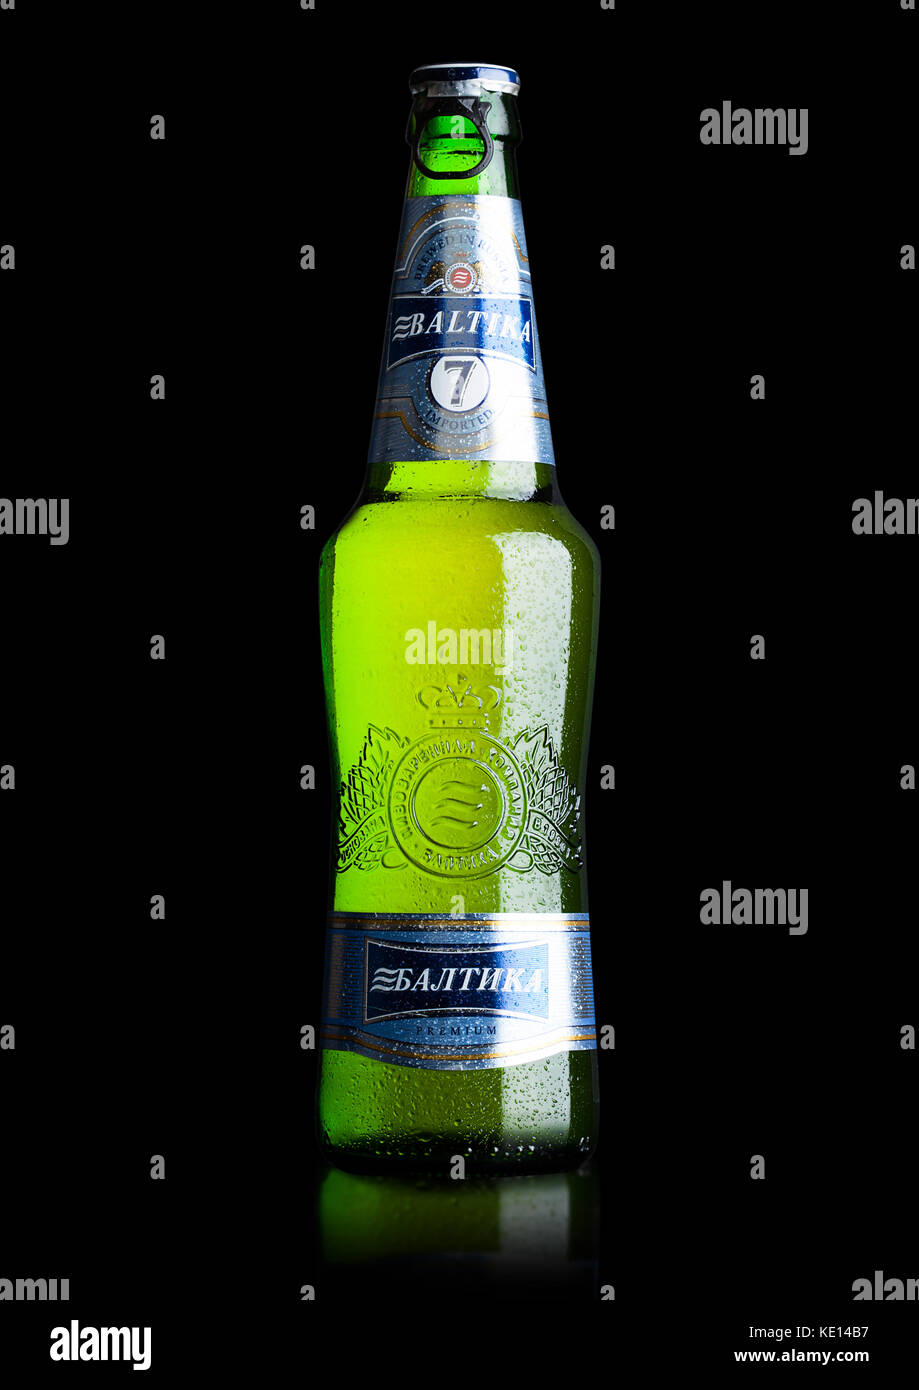 LONDON, UK - MAY 15, 2017: A bottle of Baltika Lager beer number Seven premium on black background. Baltika is the second largest brewing company in R Stock Photo